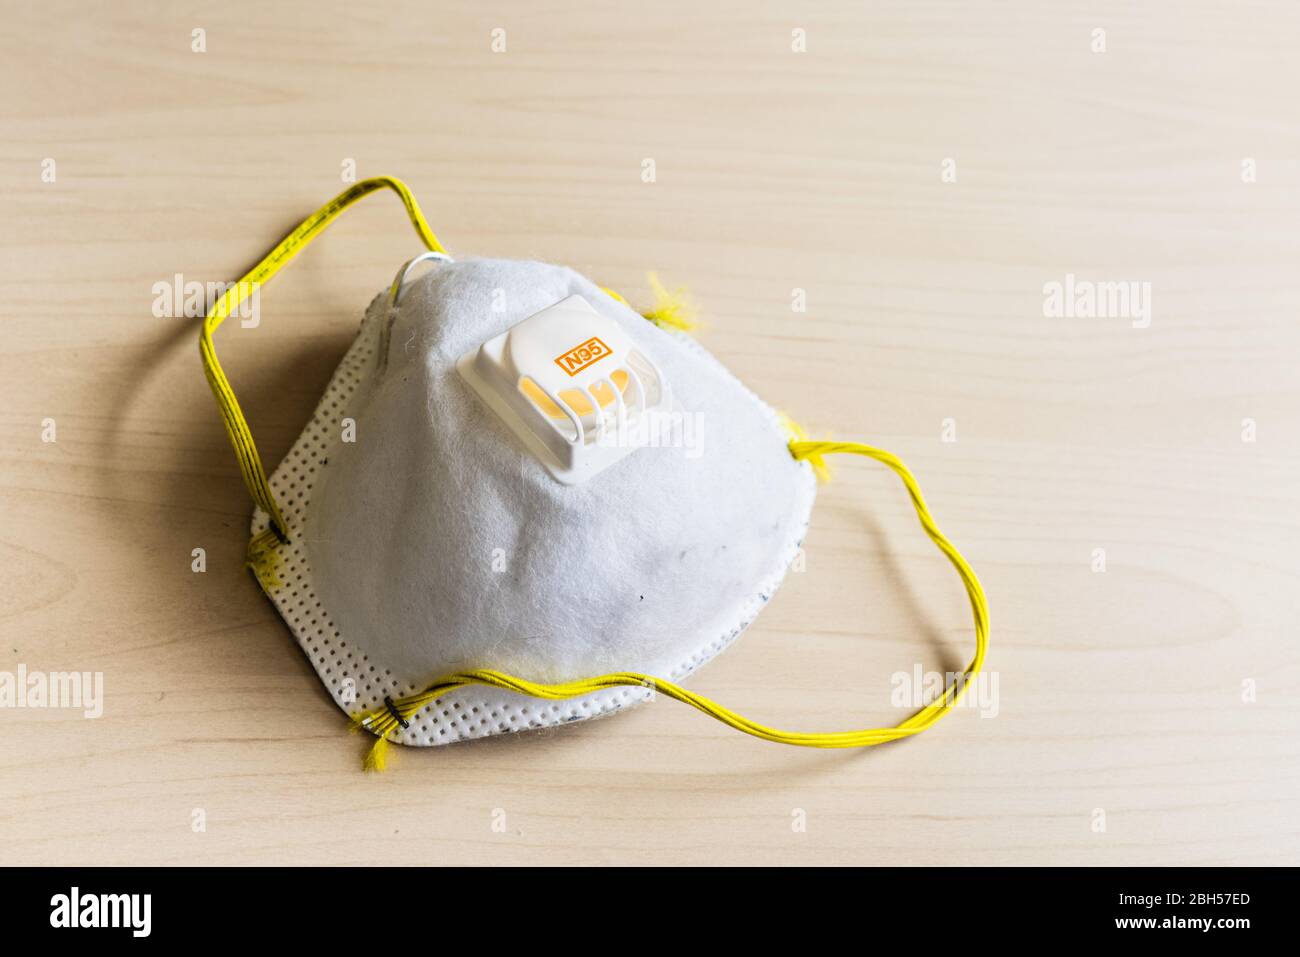 Used N95 respiratory mask discarded on a table; concept for the current PPE shortage in the battle against COVID-19 Stock Photo